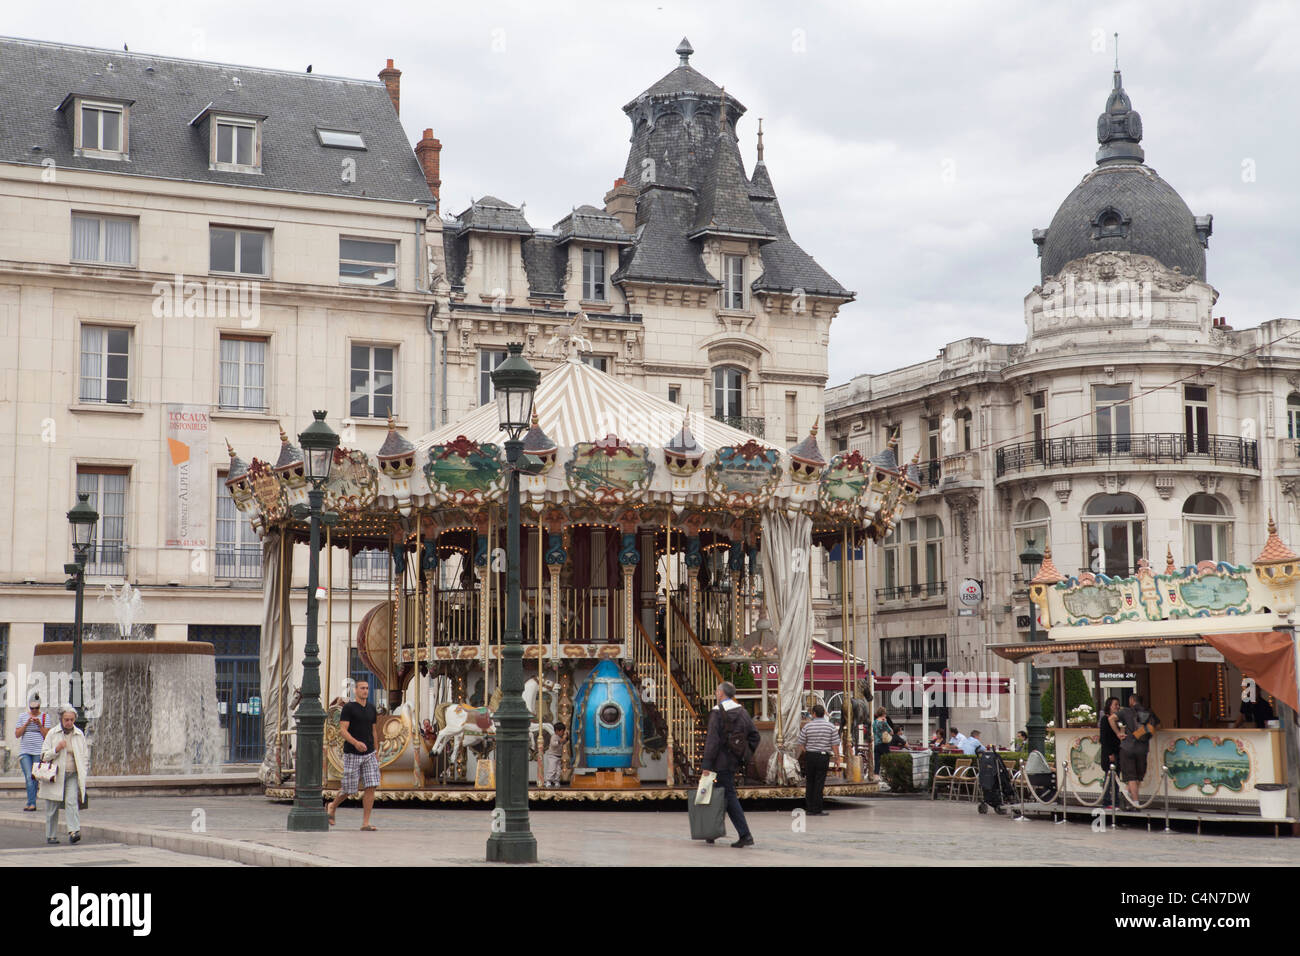 Orleans France merry urban city architecture people tourism Stock Photo